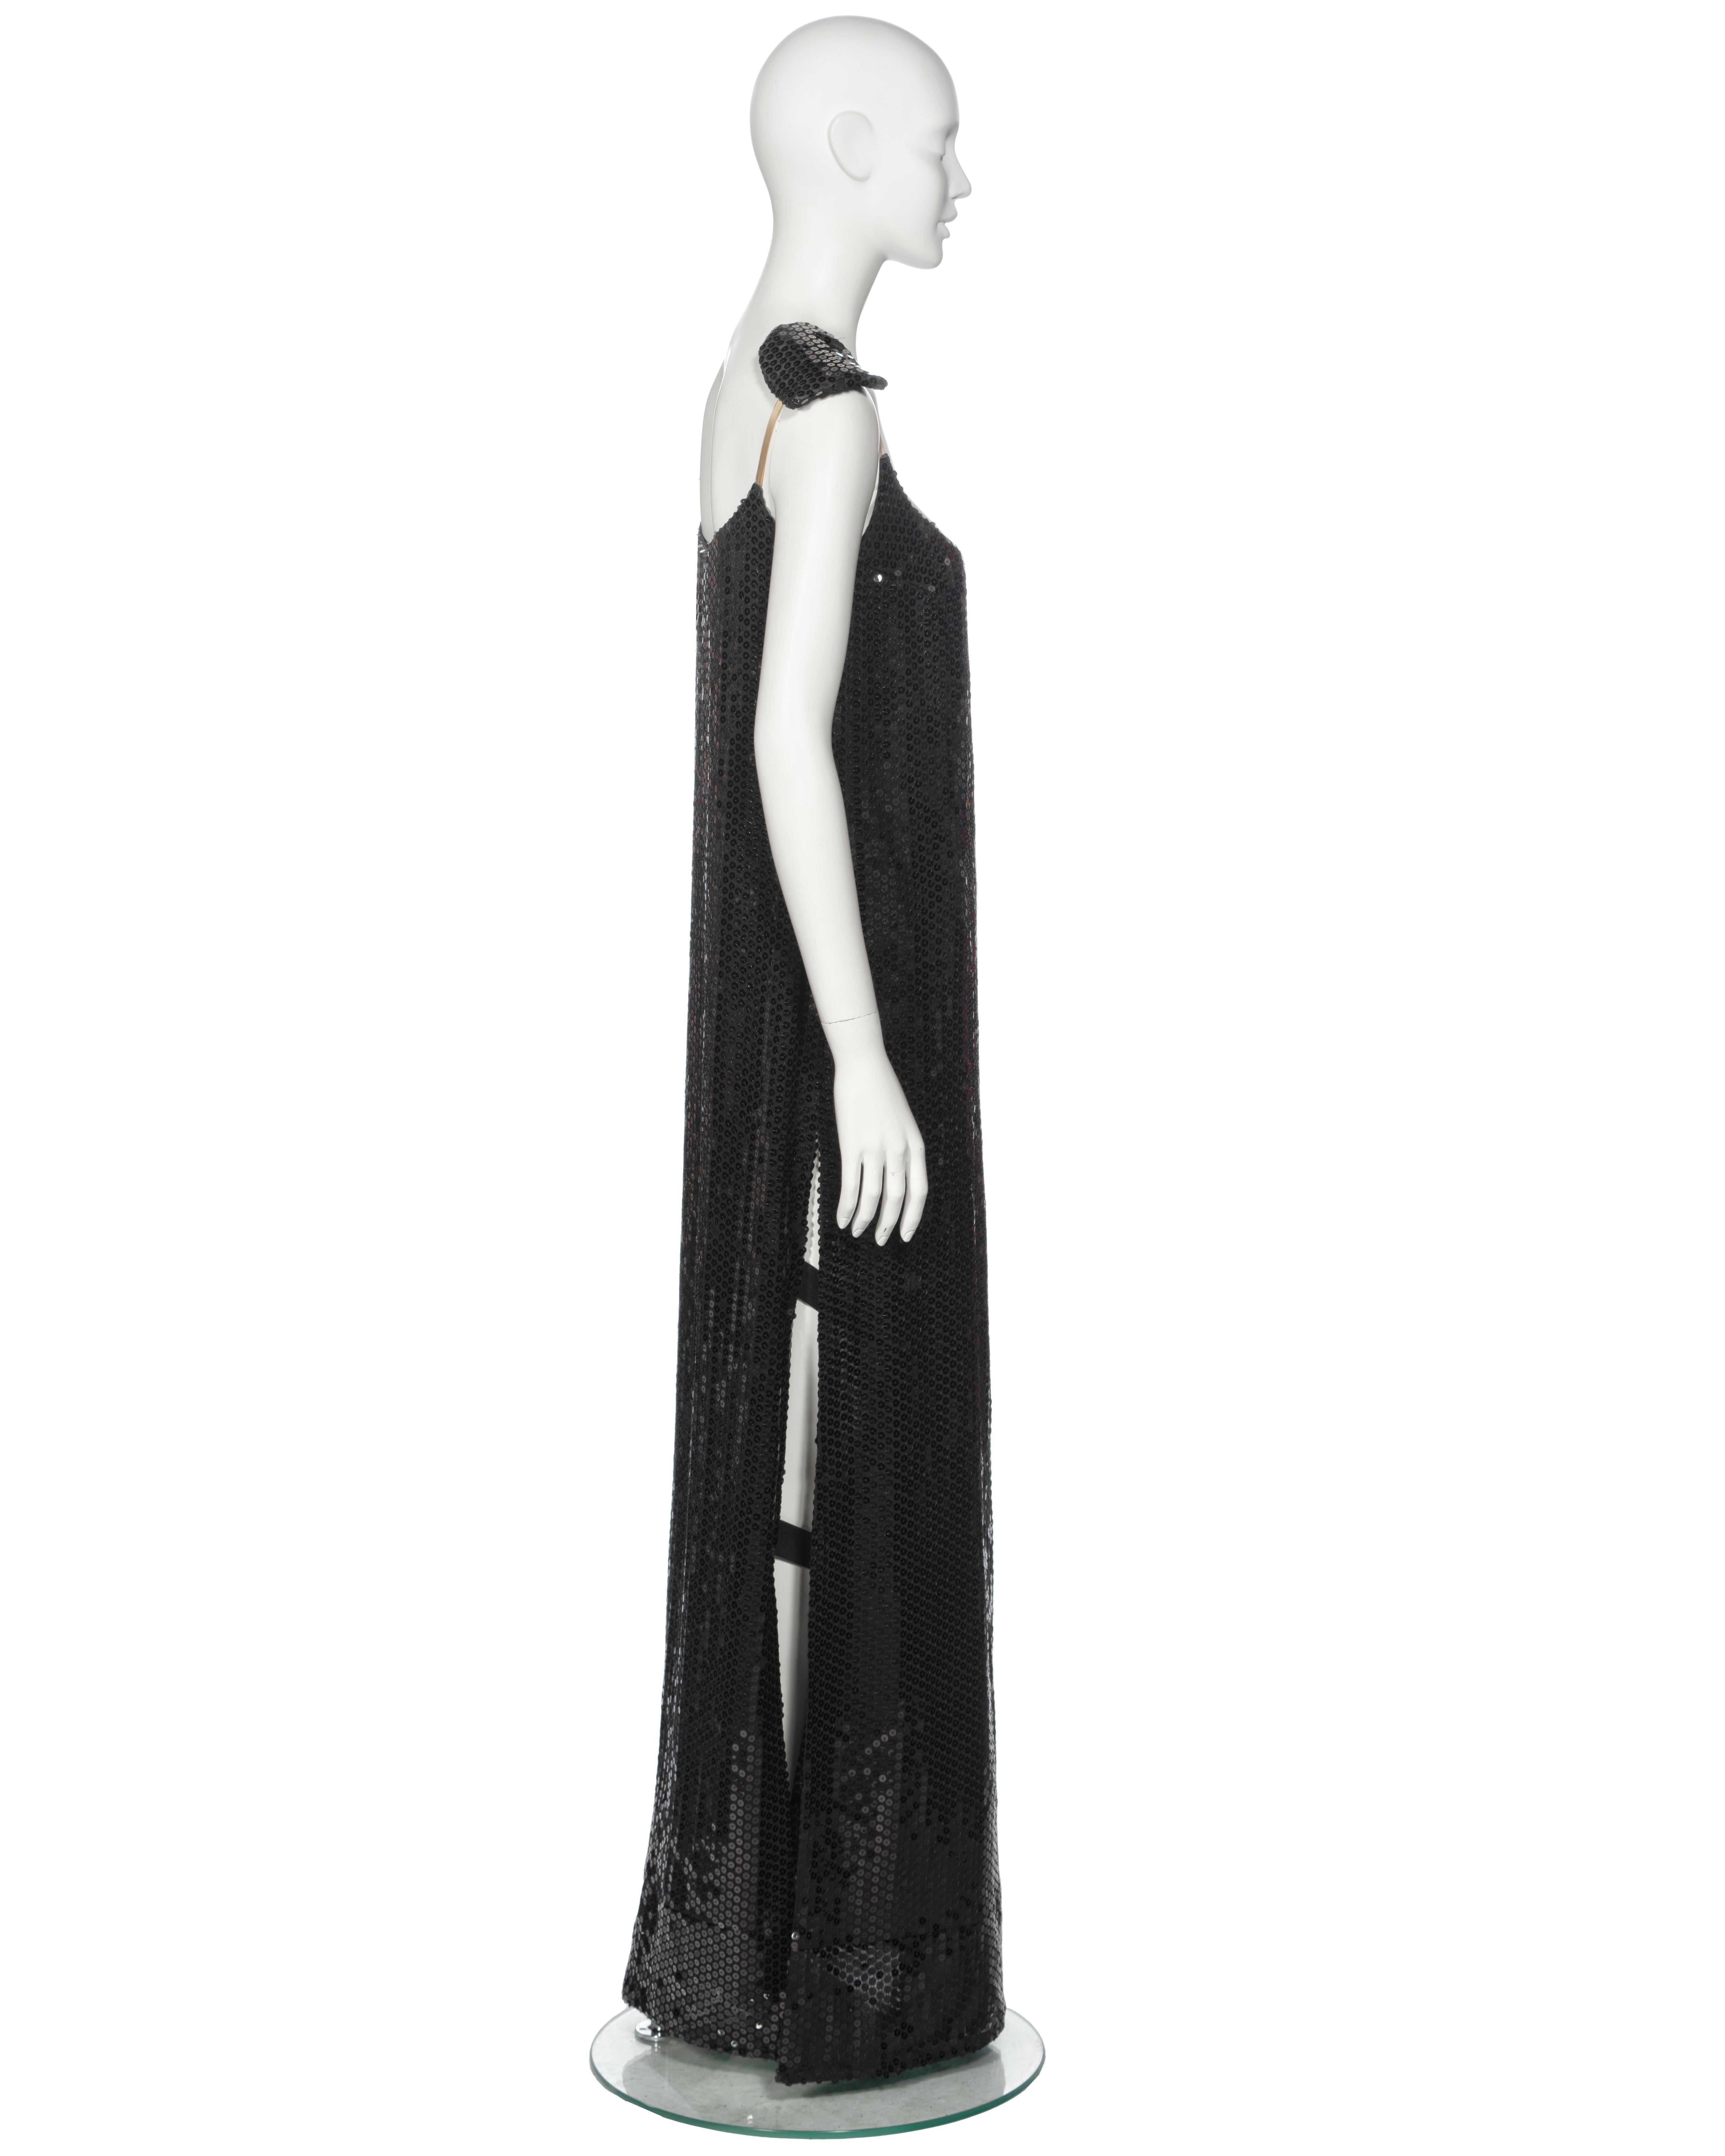 Helmut Lang Black Sequin Evening Dress With Armband, fw 1999 For Sale 6